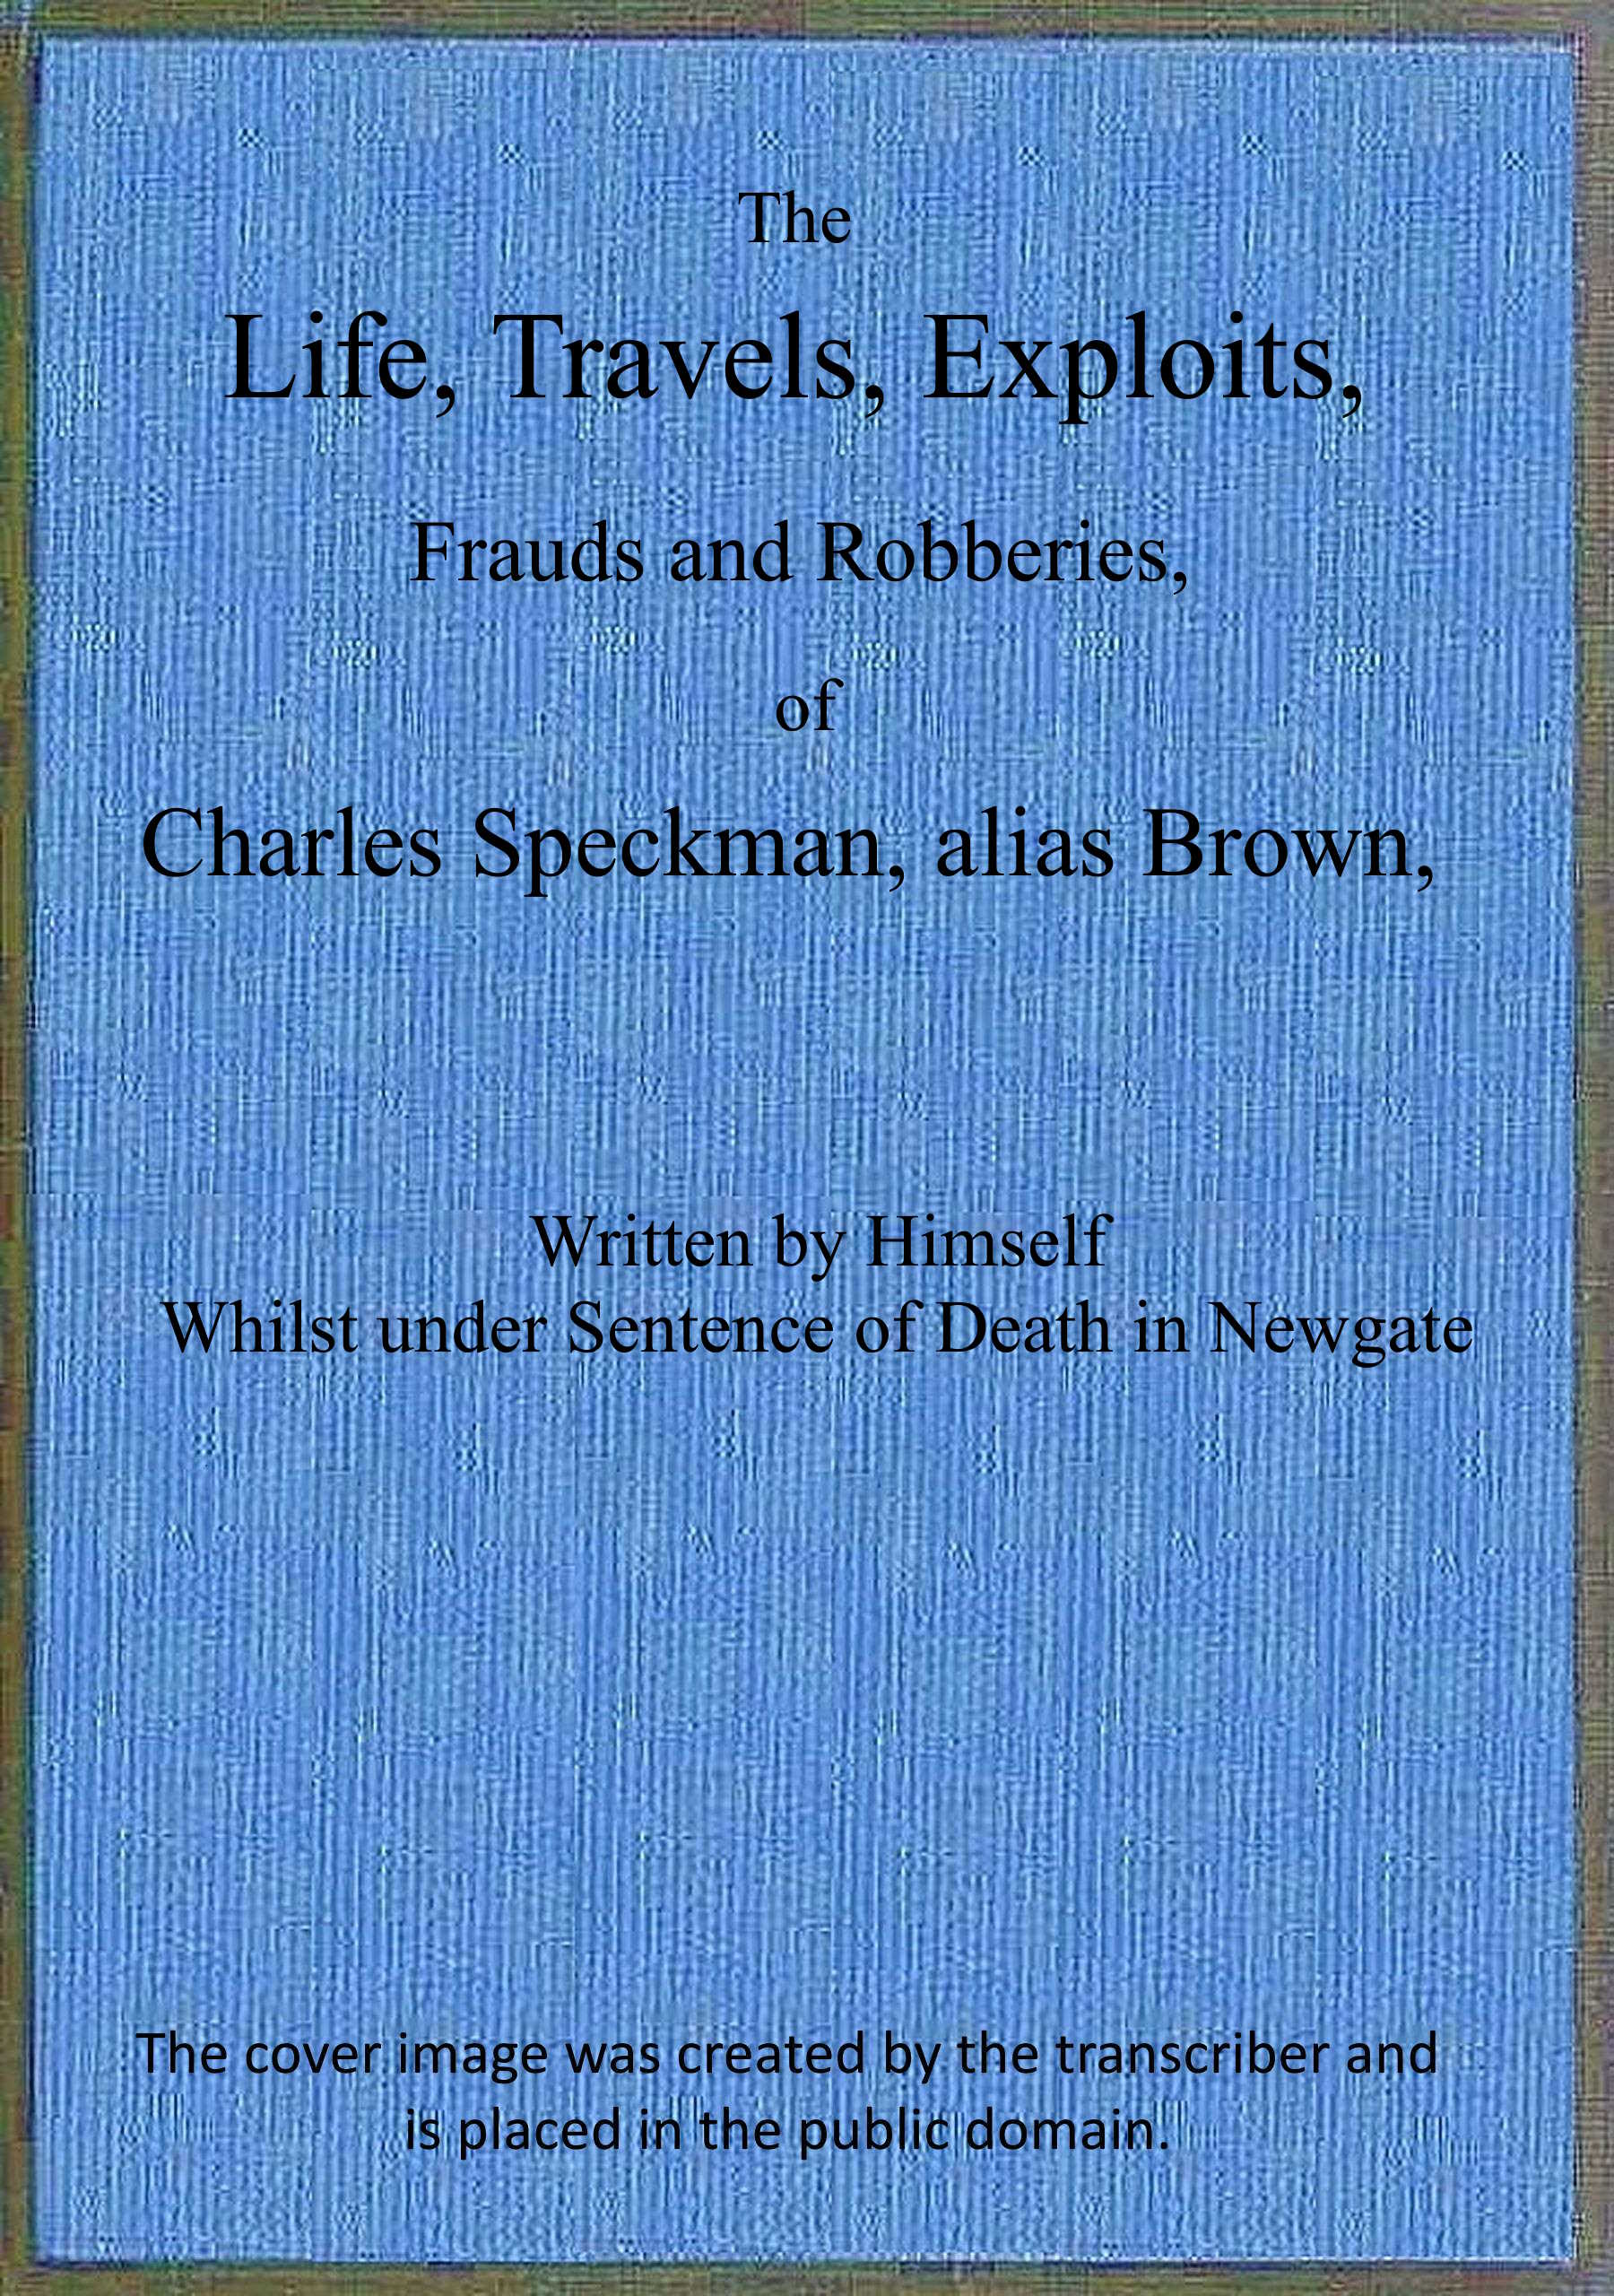 The life, travels, exploits, frauds and robberies of Charles Speckman, alias Brown, who was executed at Tyburn on Wednesday 23d of November, 1763